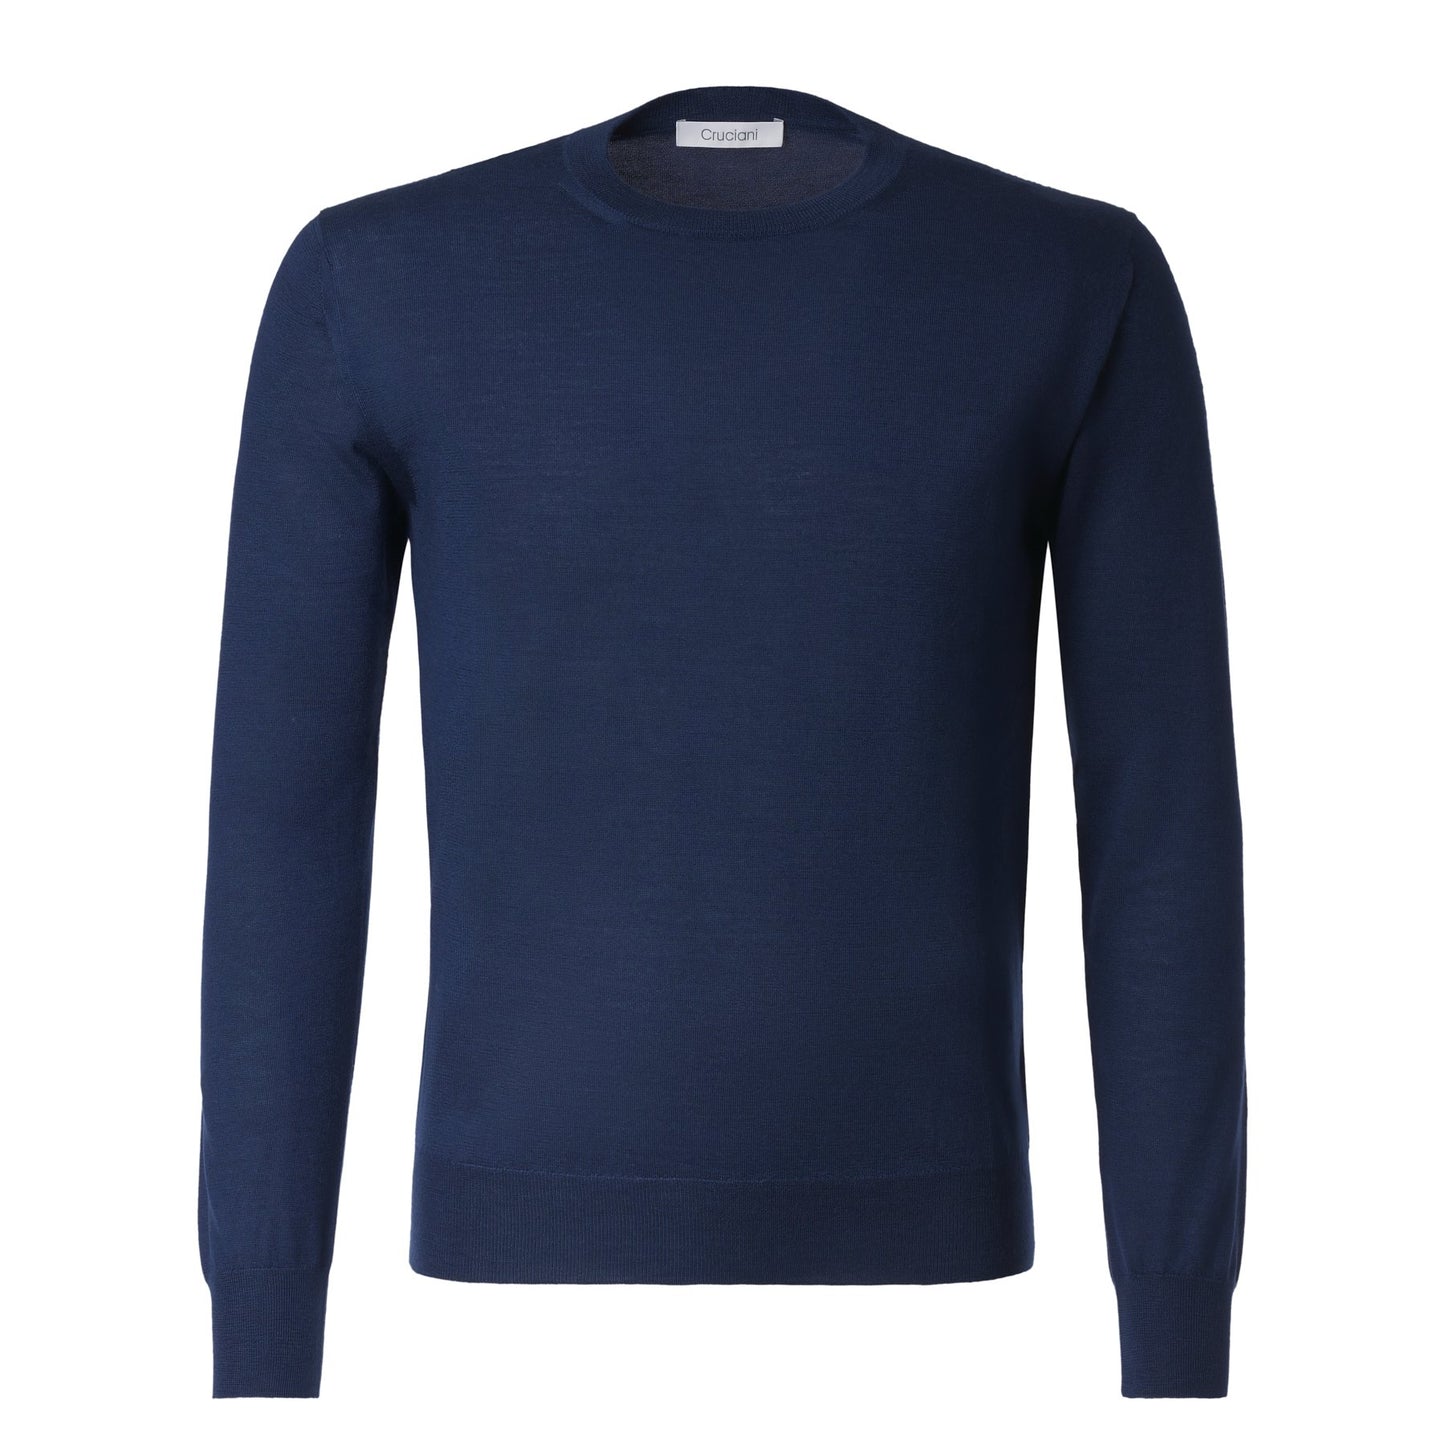 Cruciani Crew-Neck Cashmere and Silk-Blend Sweater in Navy Blue - SARTALE